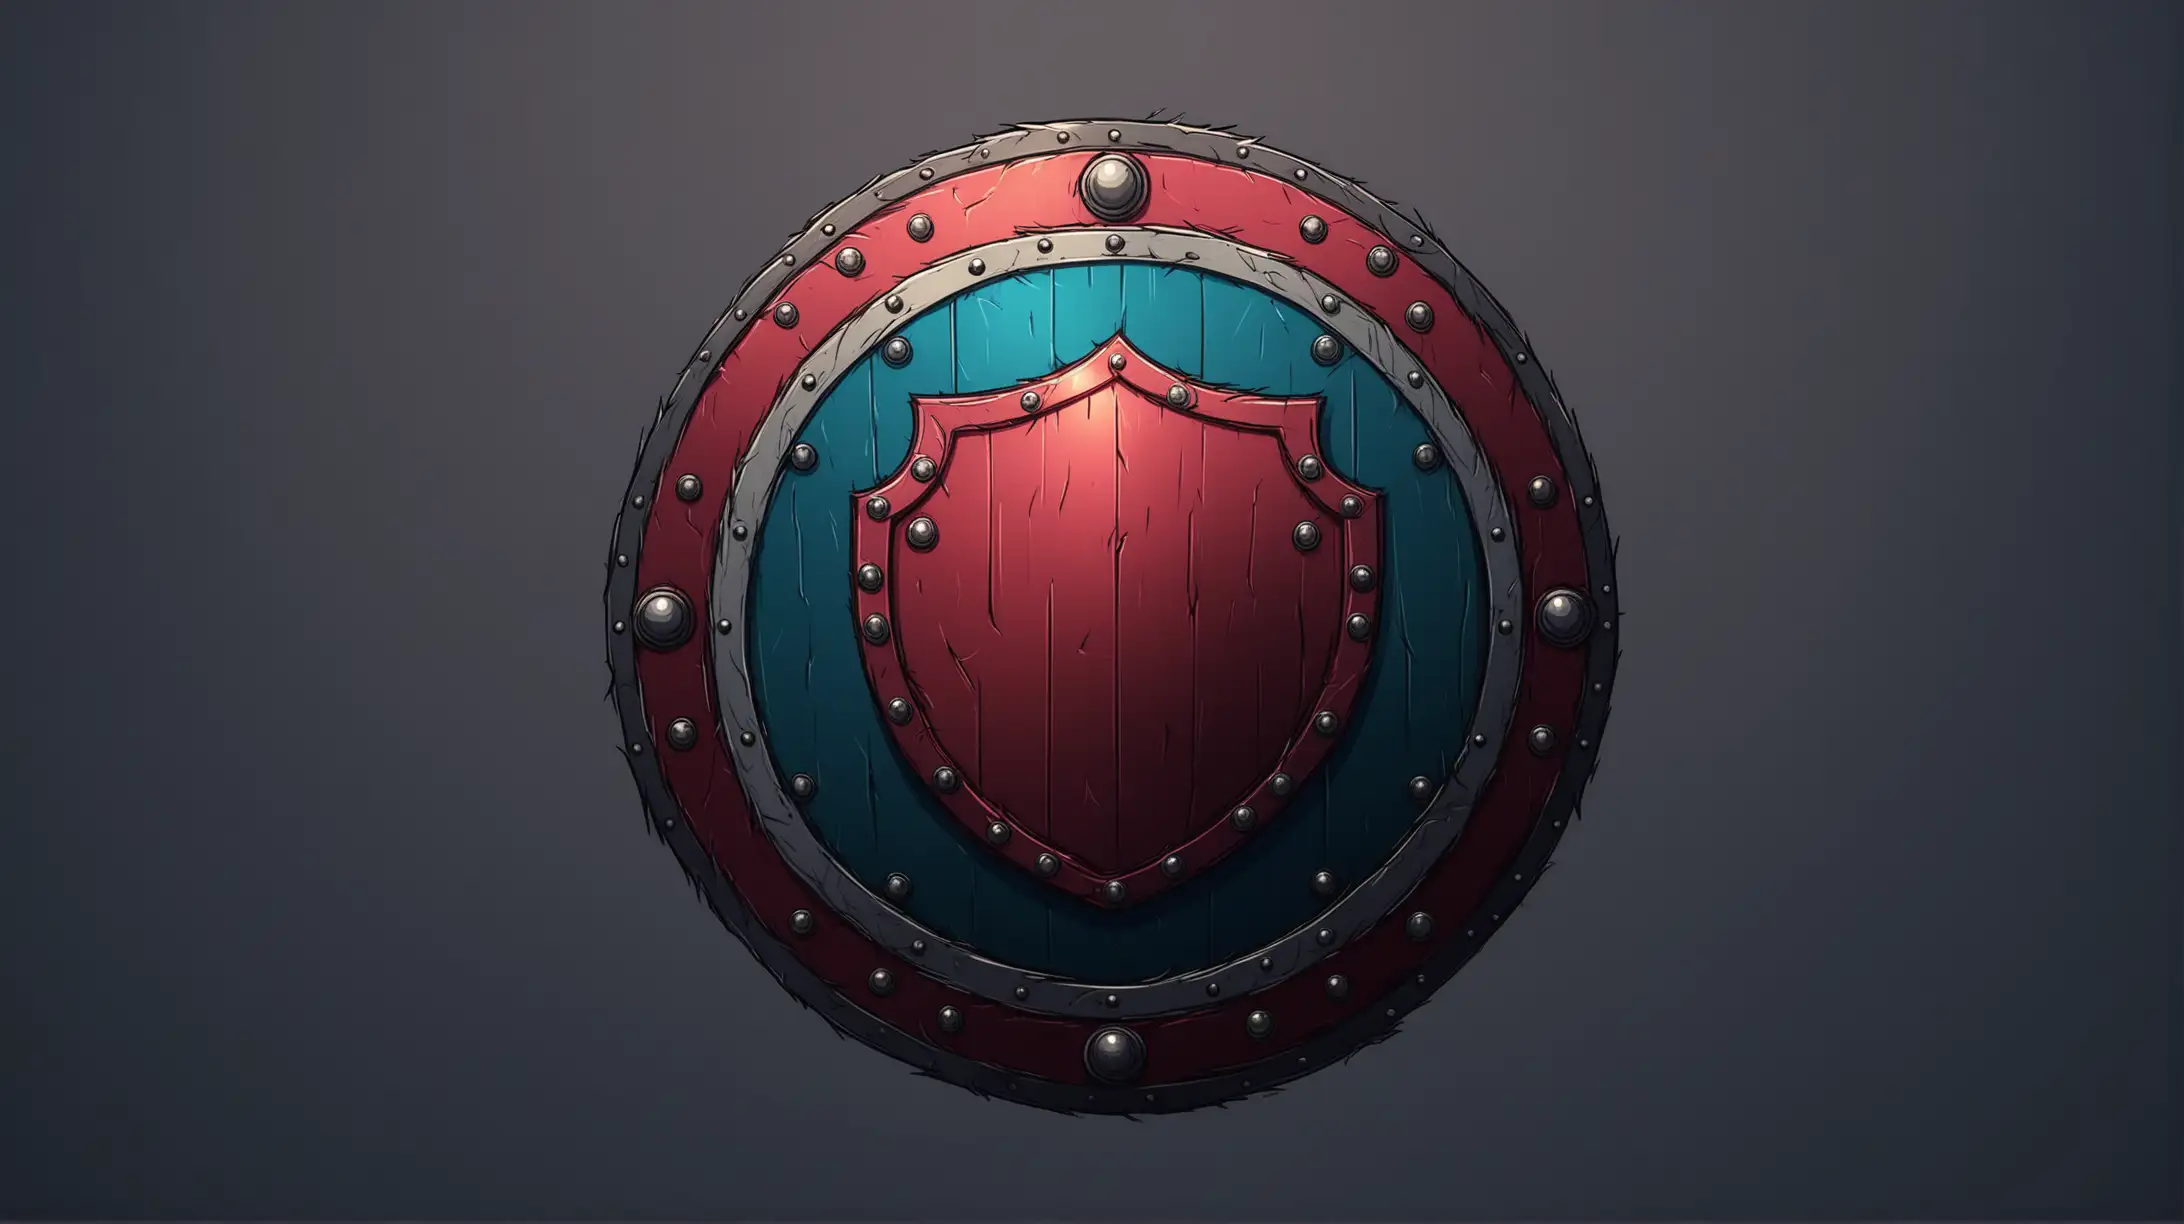 Generate an image of a shield with dark vibrant colors but not too detailed more minimalistic. 